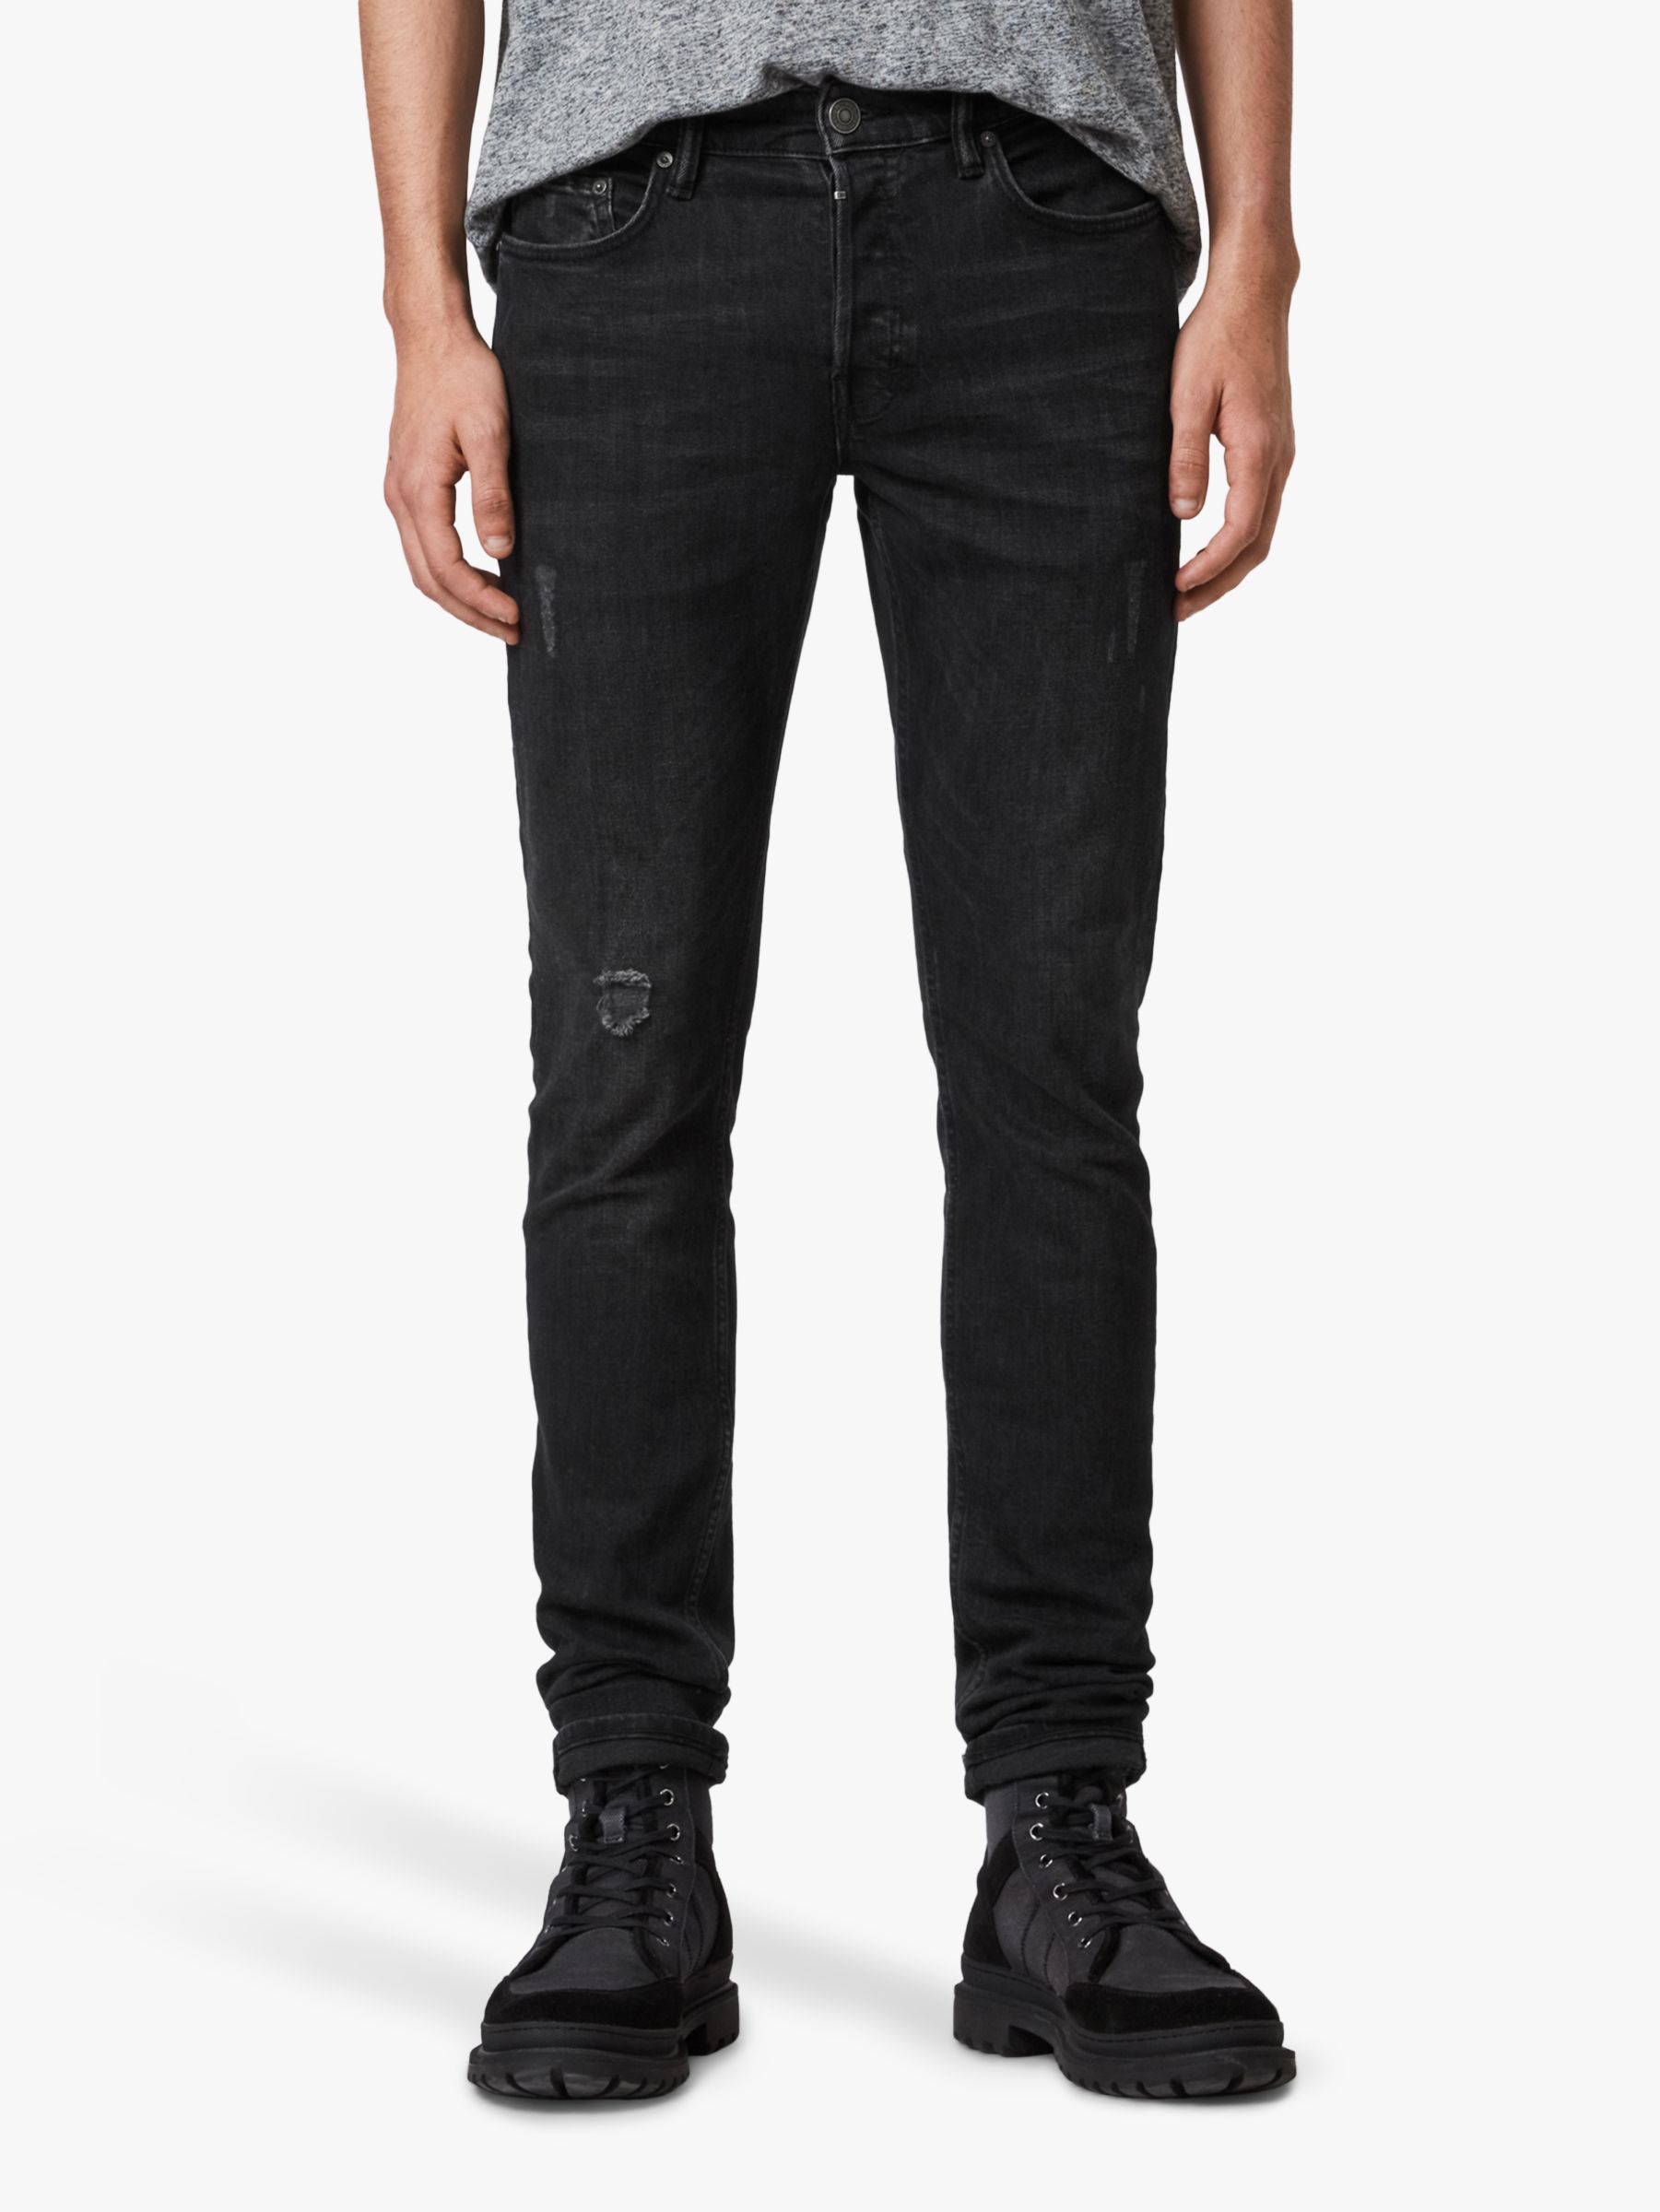 AllSaints Rex Straight Skinny Fit Jeans, Washed Black, 30R